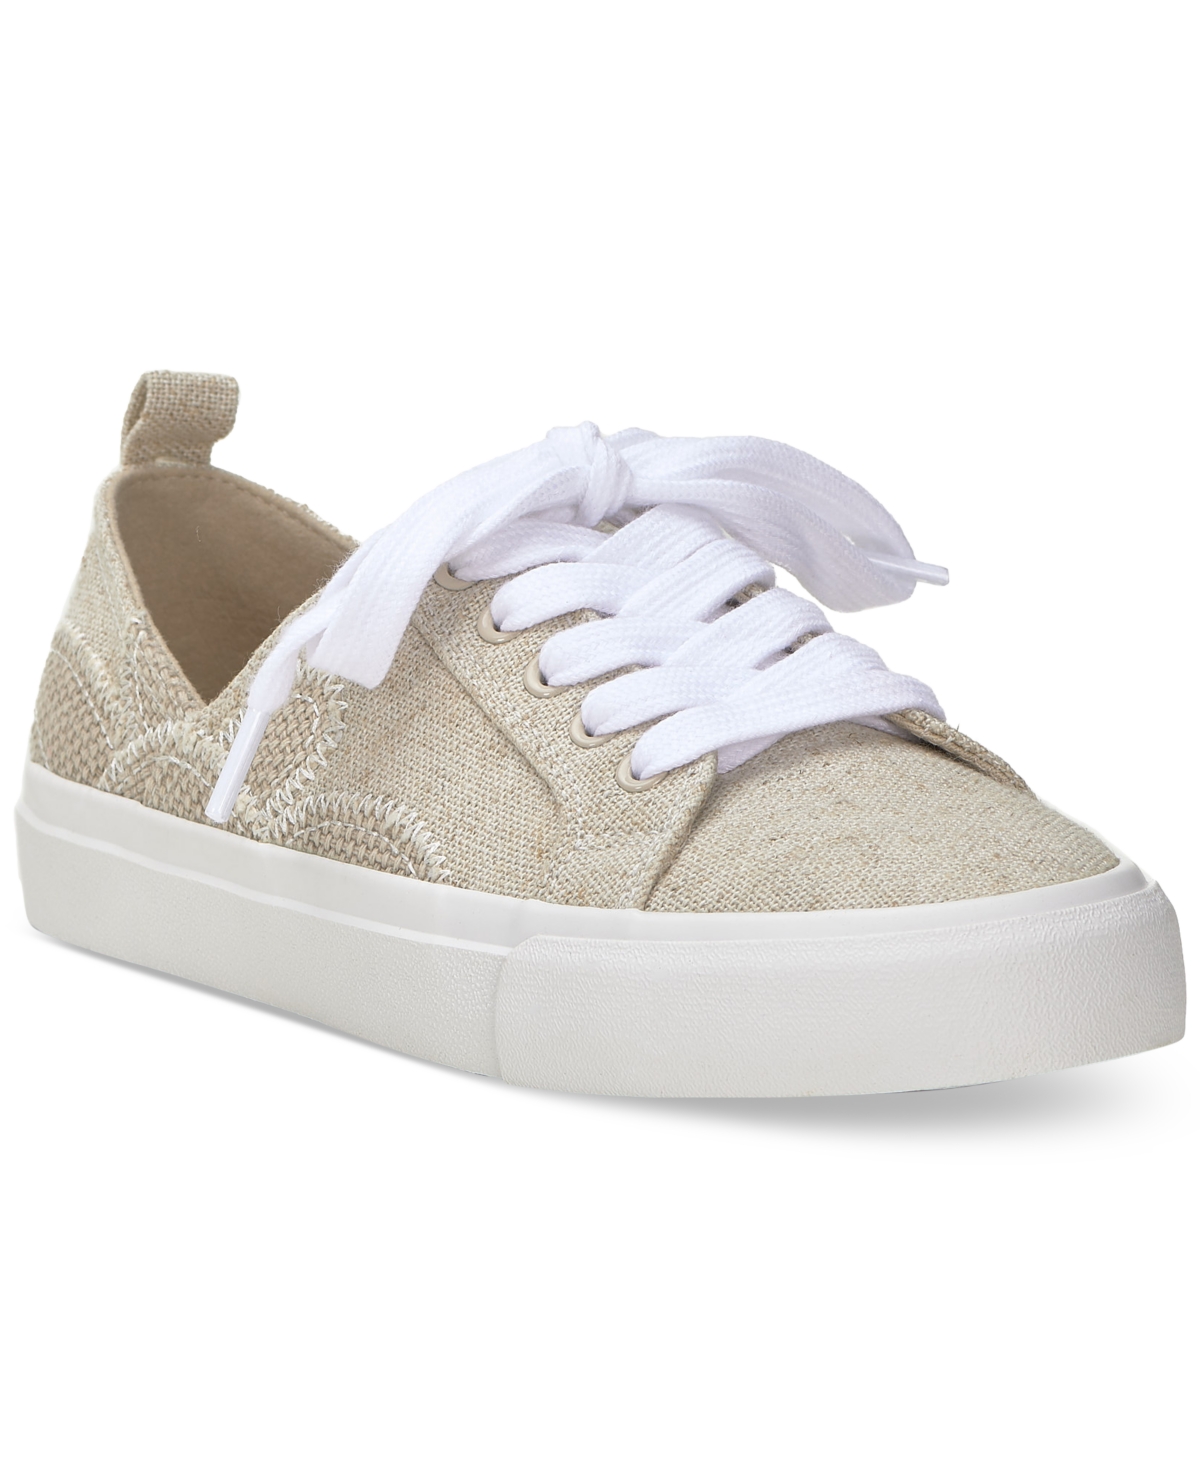 Women's Dyllis Cutout Lace-Up Sneakers - Natural